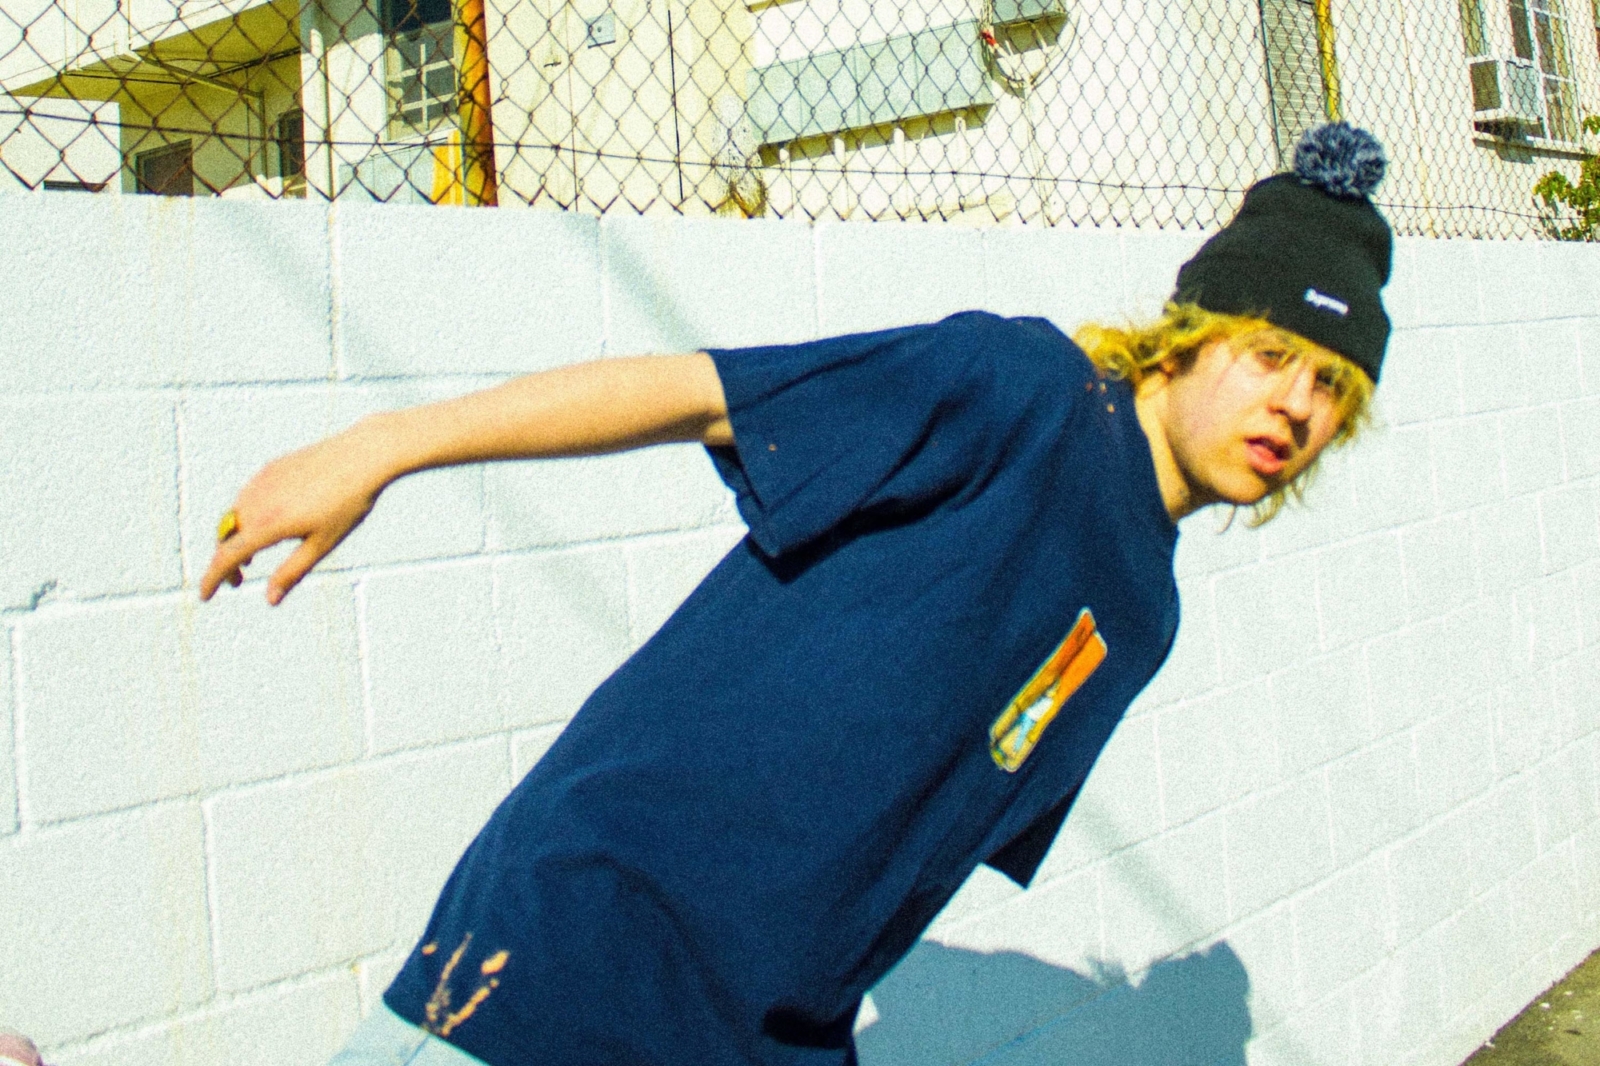 Rat Boy previews ‘Internationally Unknown’ with new single ‘Don’t Hesitate’